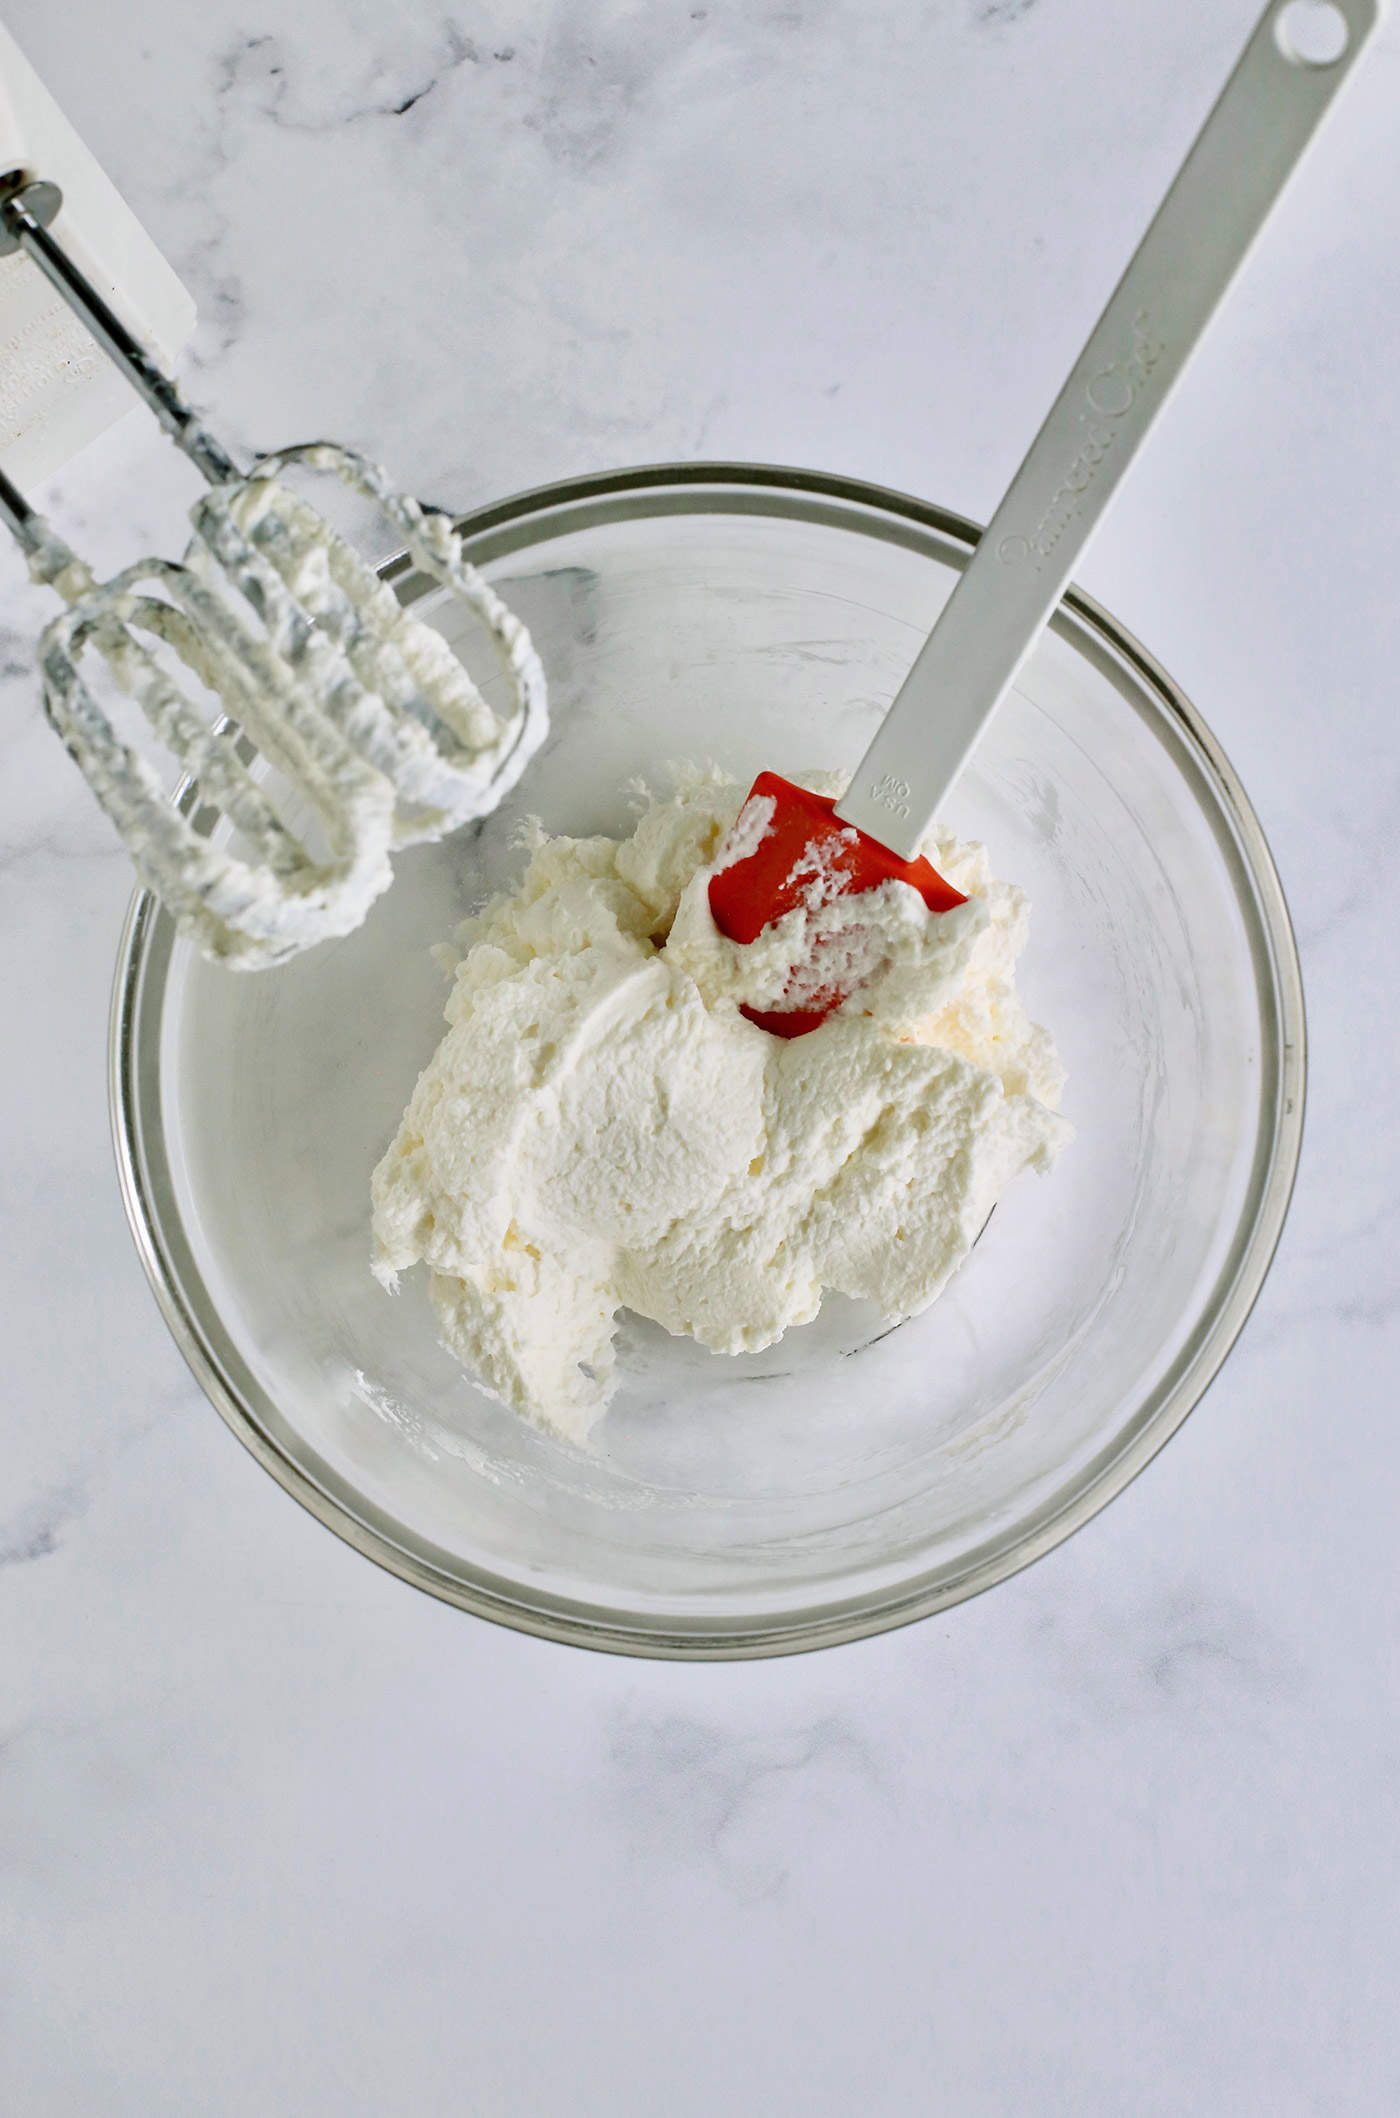 a clear bowl of stiffly whipped cream